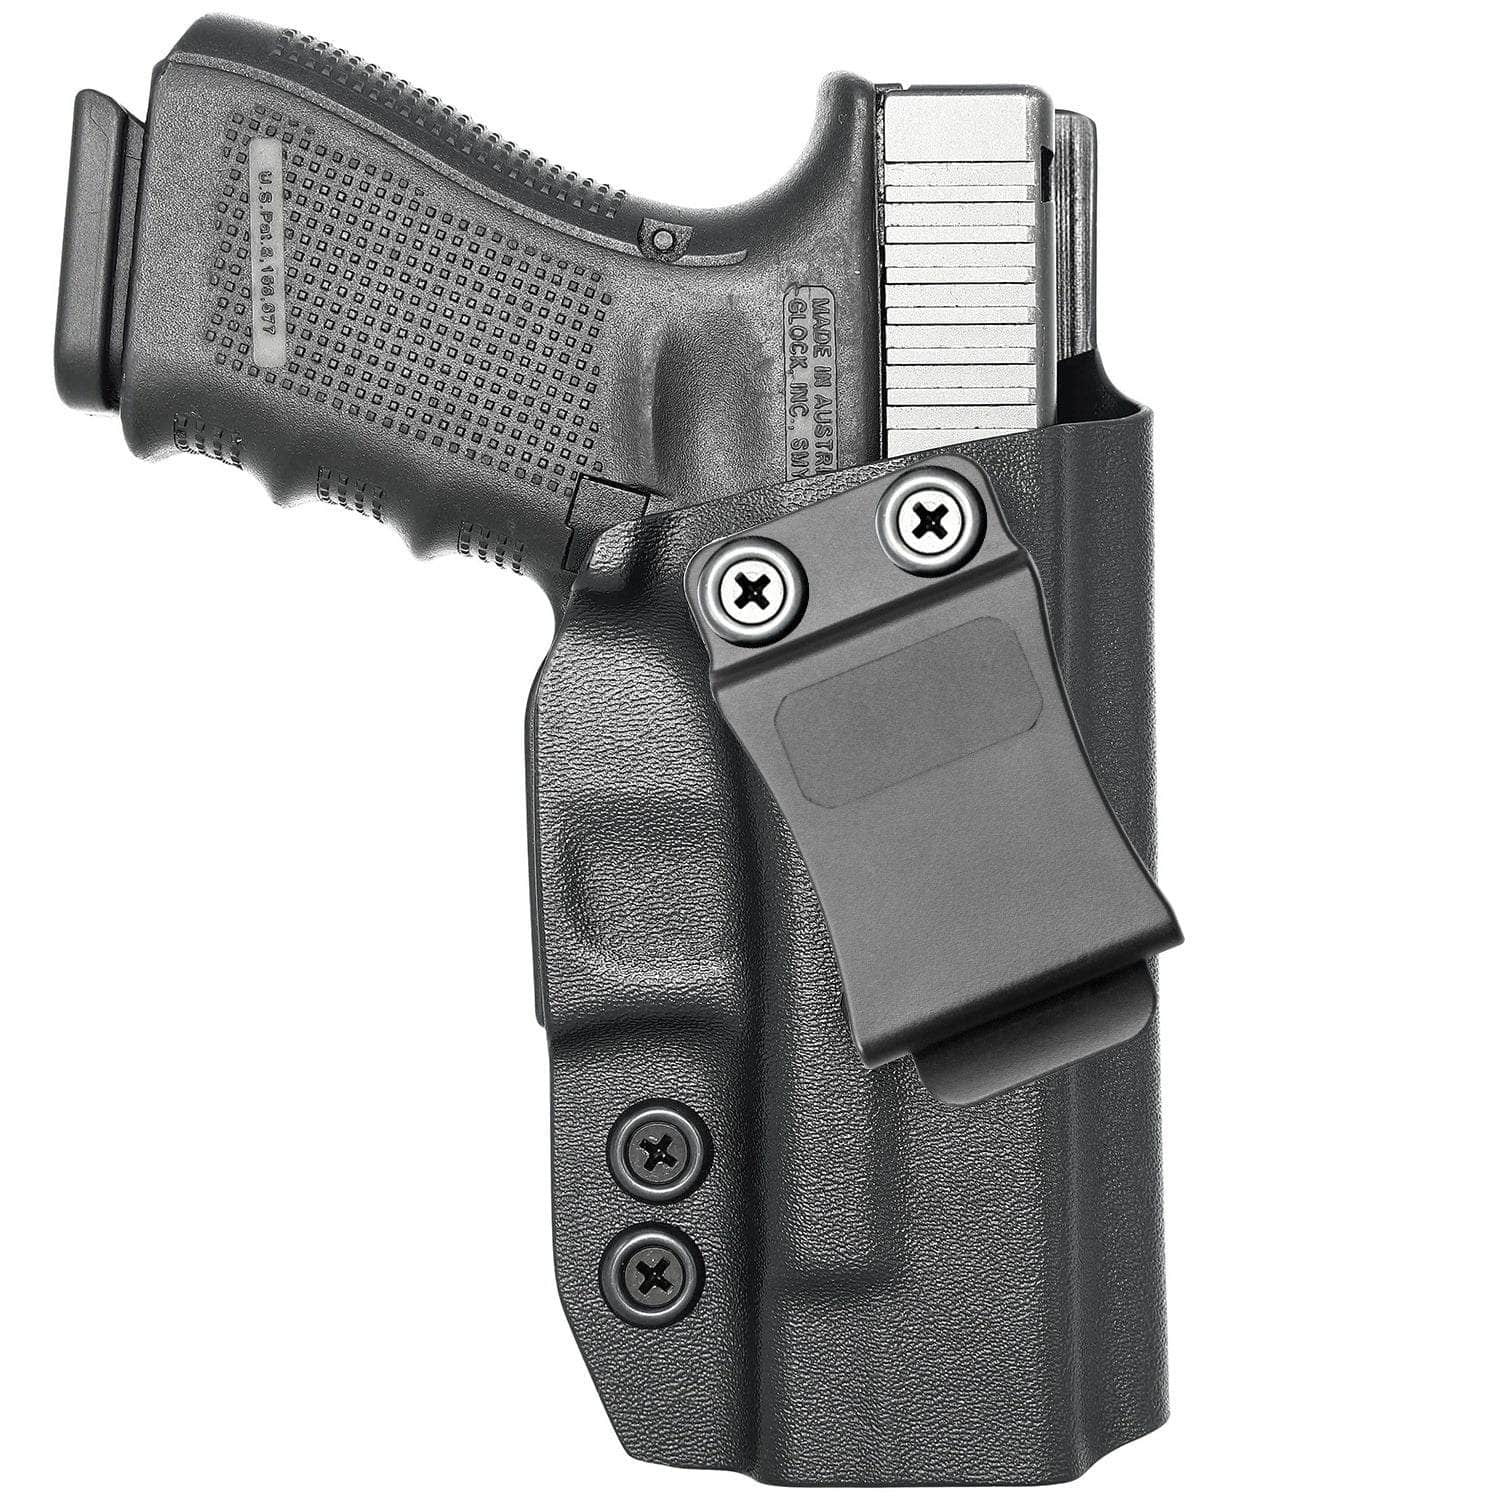 Kydex Holster Quick Clips For 1.5 Belts Fits IWB Ryobi Whipper